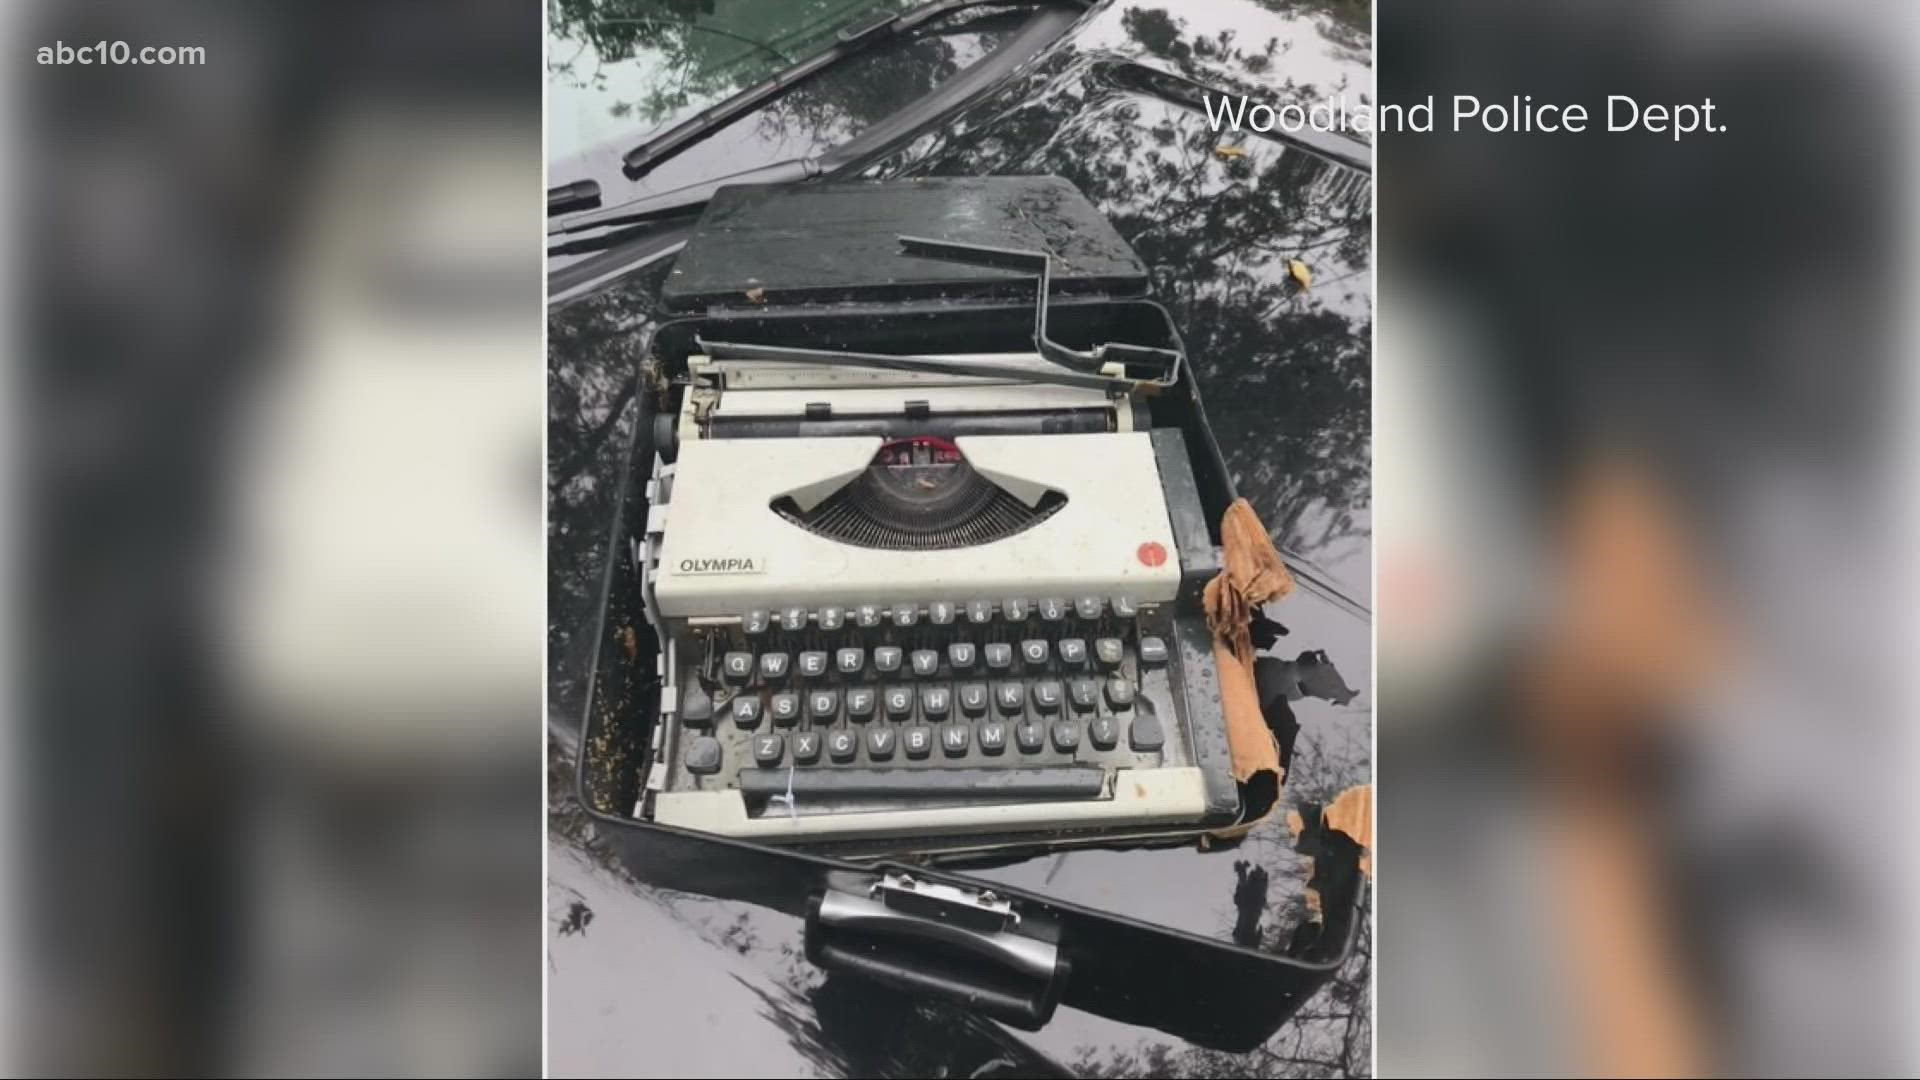 A suspicious package in Woodland was revealed to be a typewriter, and Cal Fire Chief Thom Porter announces his retirement.